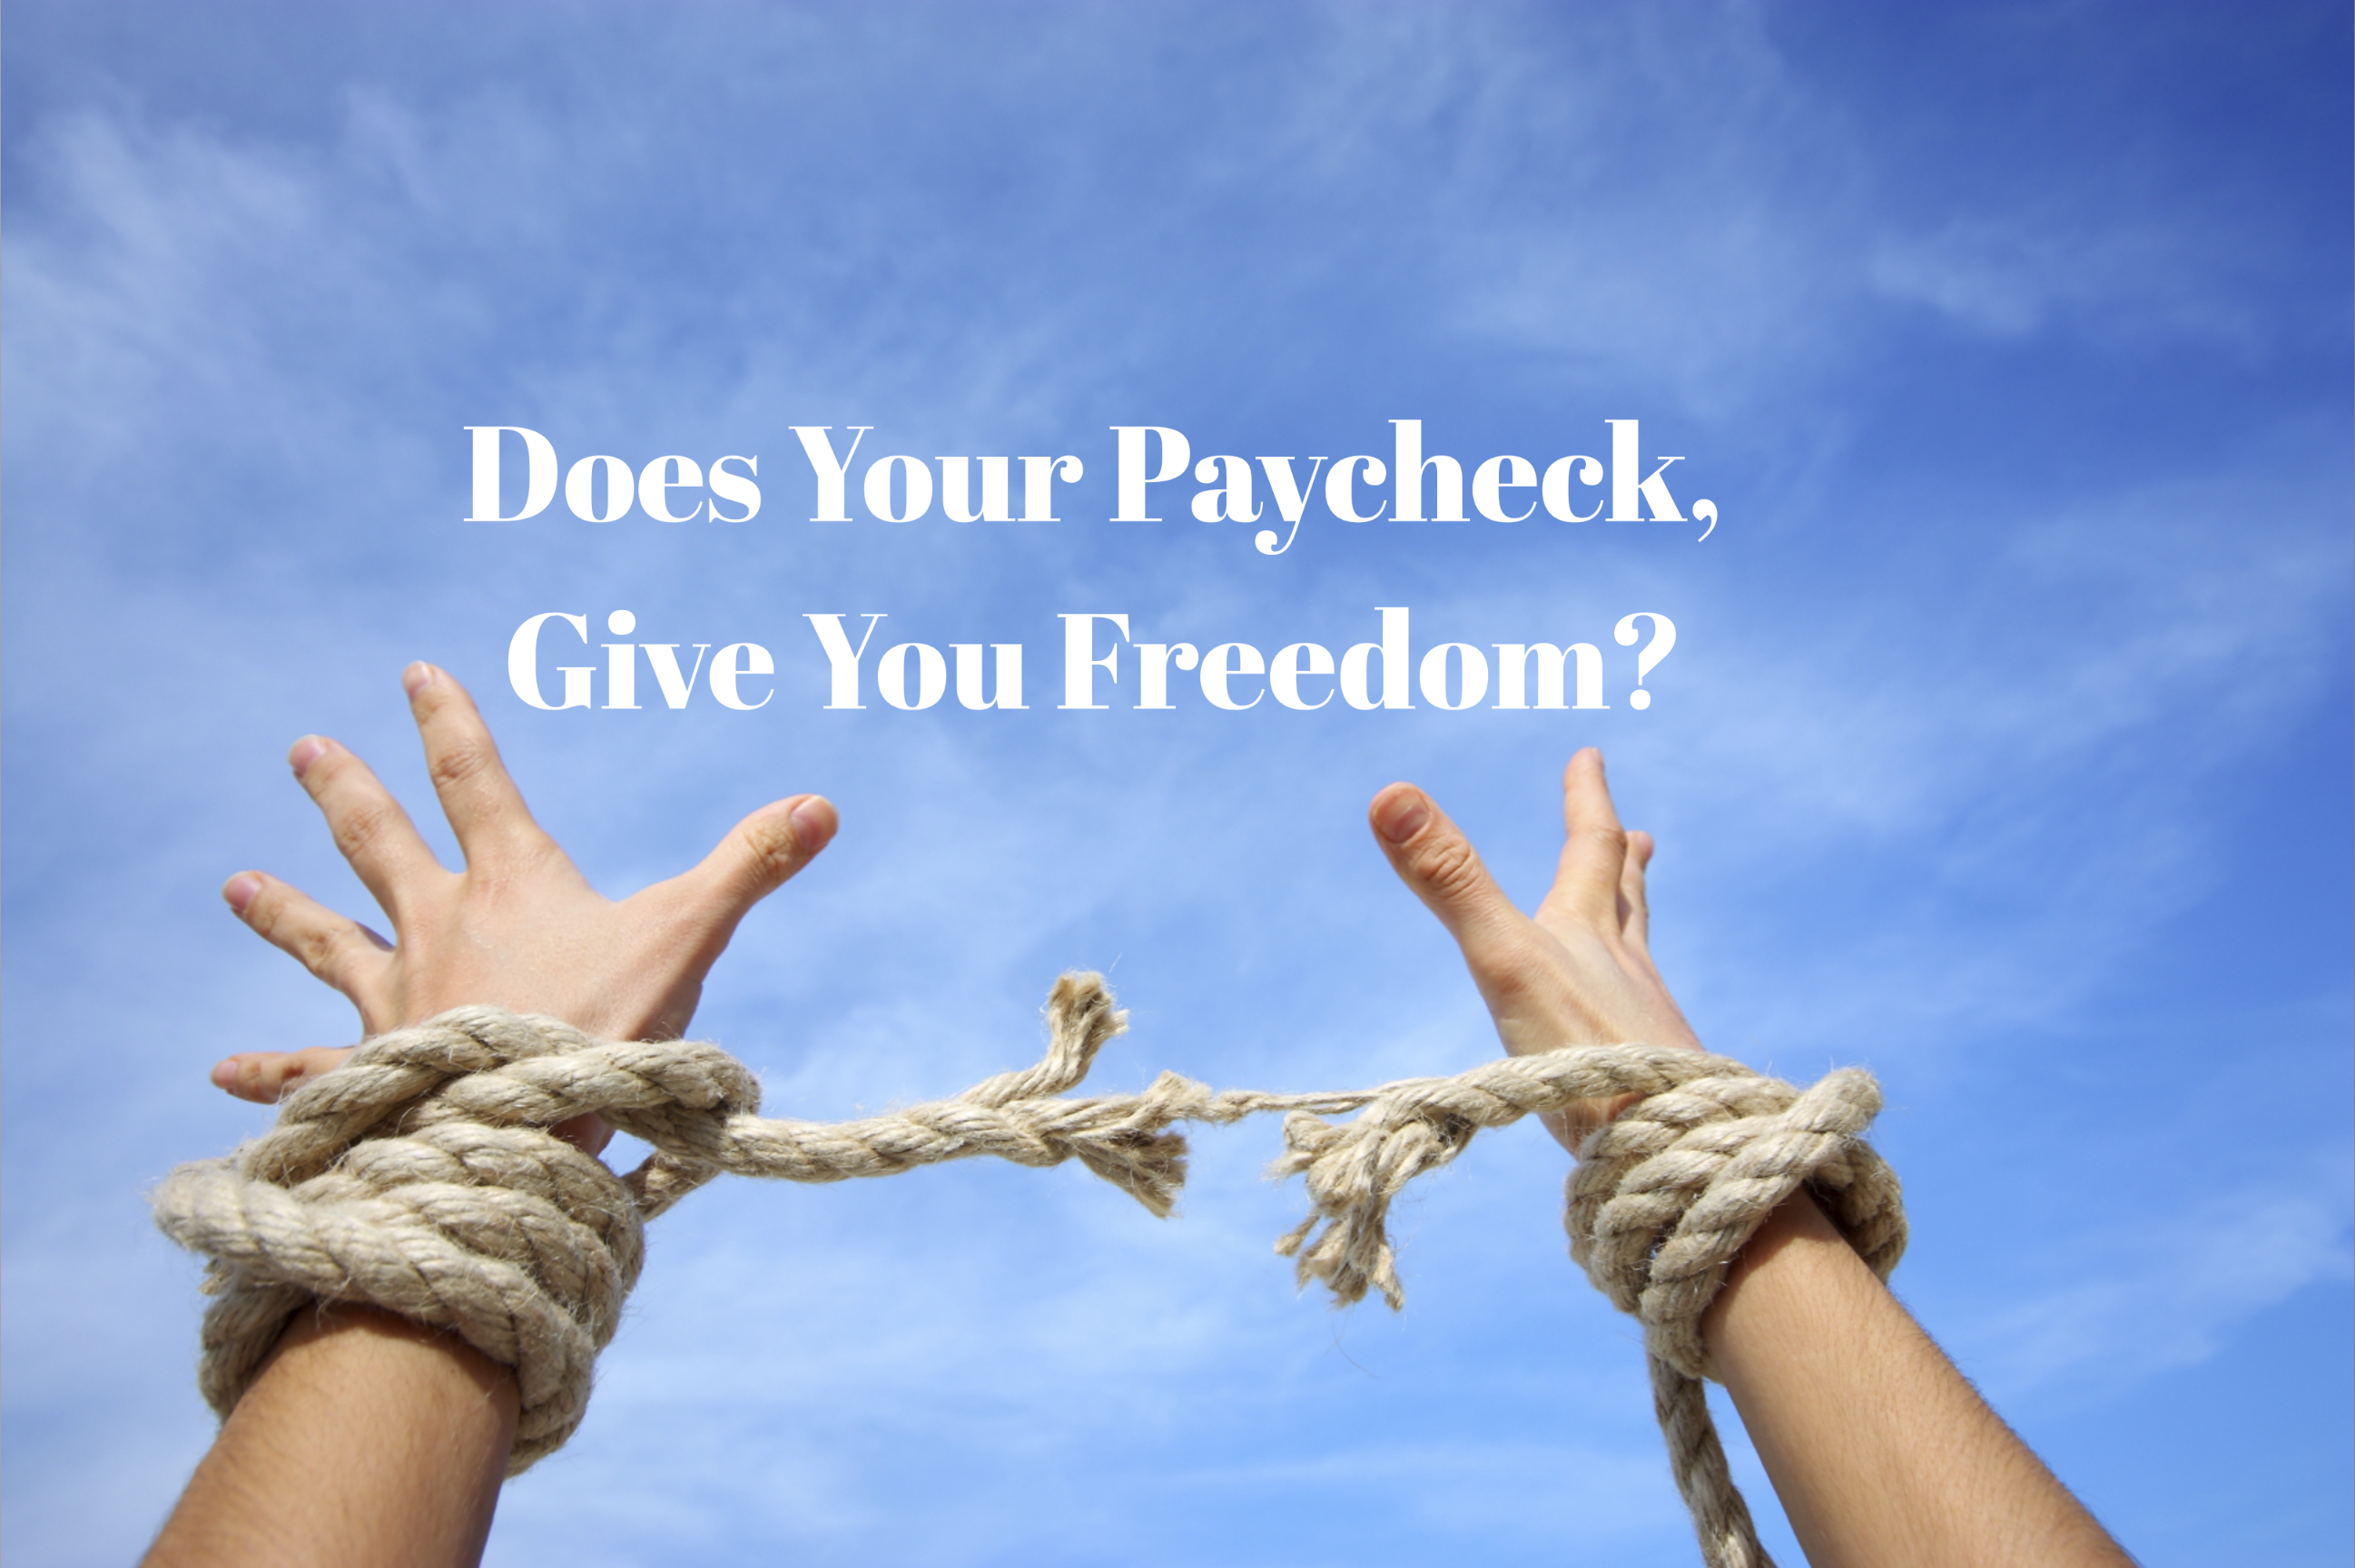 Does your paycheck give you freedom?